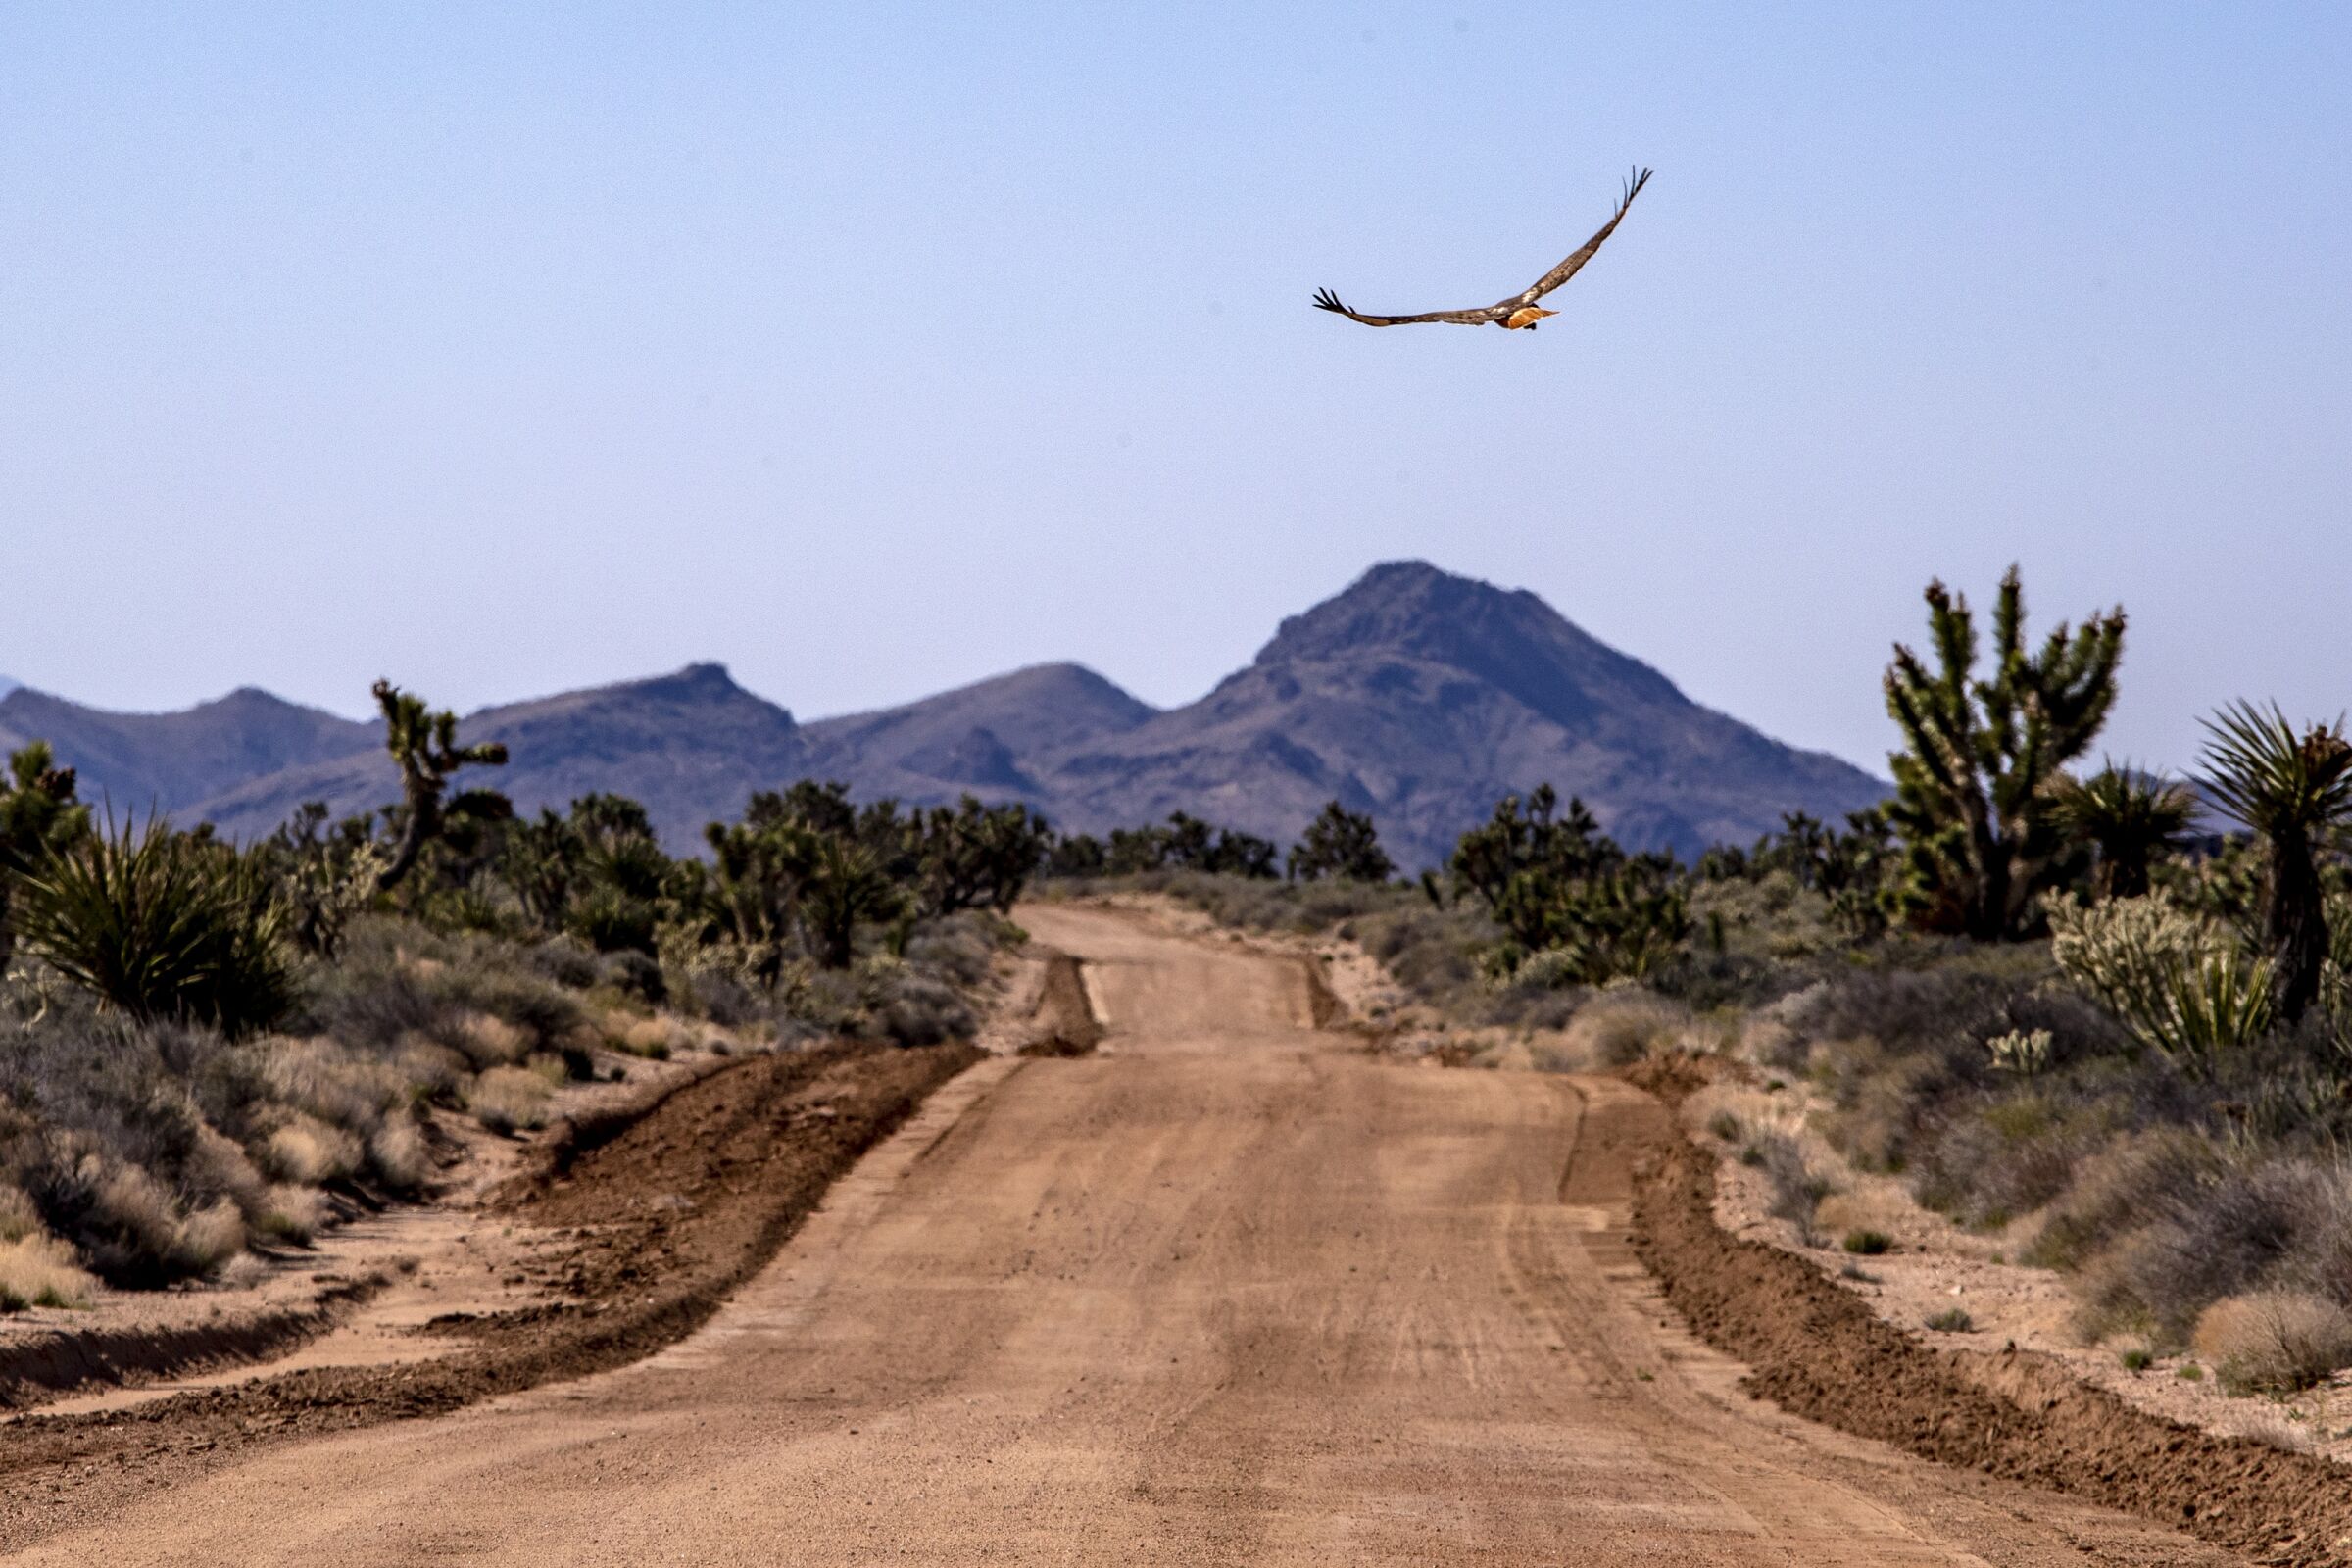 A red-tailed hawk flies over the historic Mojave Road in the Mojave National Preserve